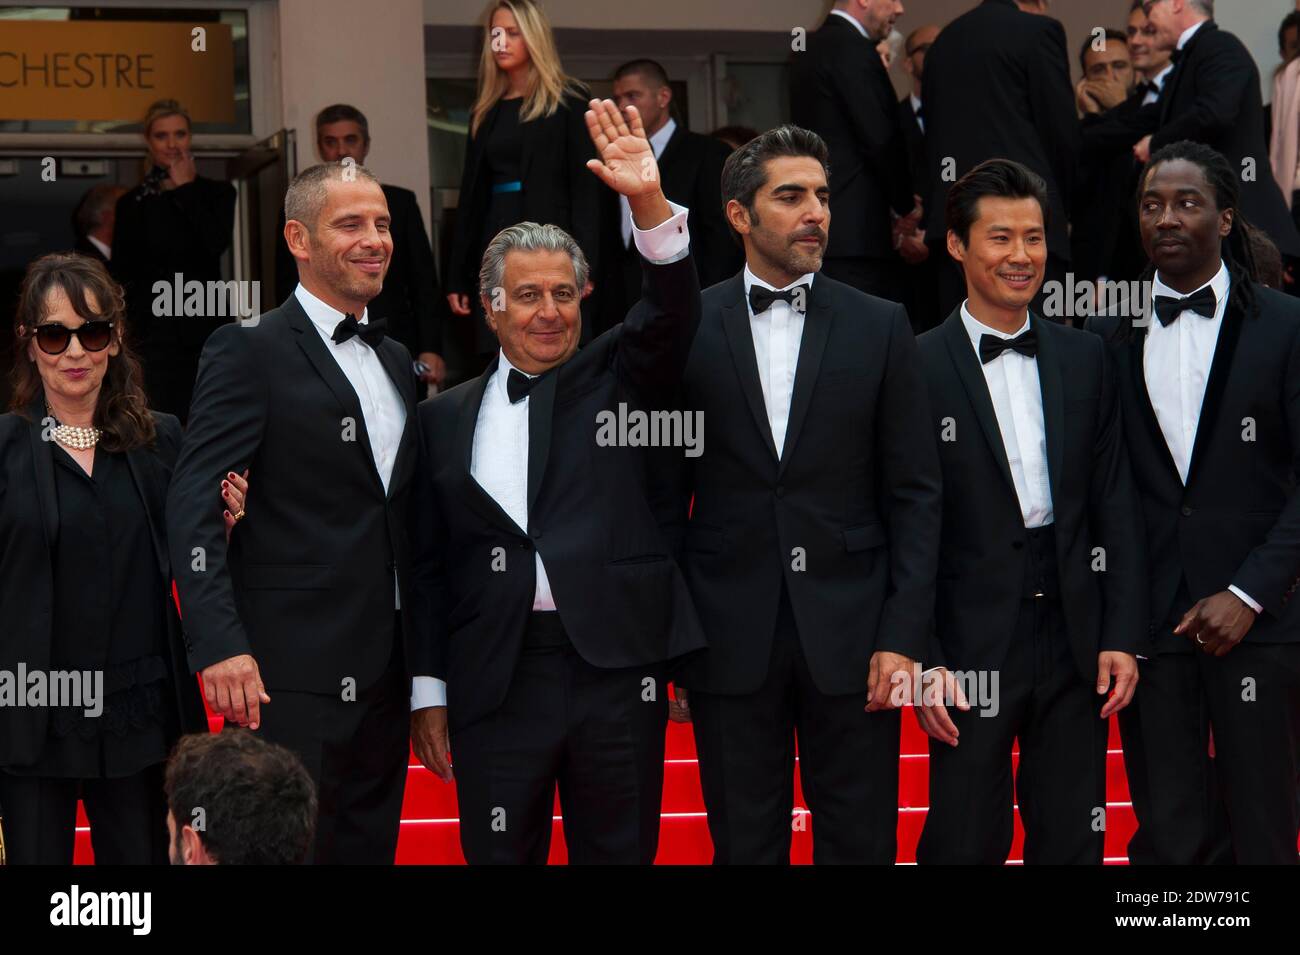 Christian Clavier and Chantal Lauby, Medi Sadoun, Ary Abittan, Frederic  Chau and Noom Diawara arriving at the Palais des Festivals for the  screening of the film Jimmy's Hall presented in competition as